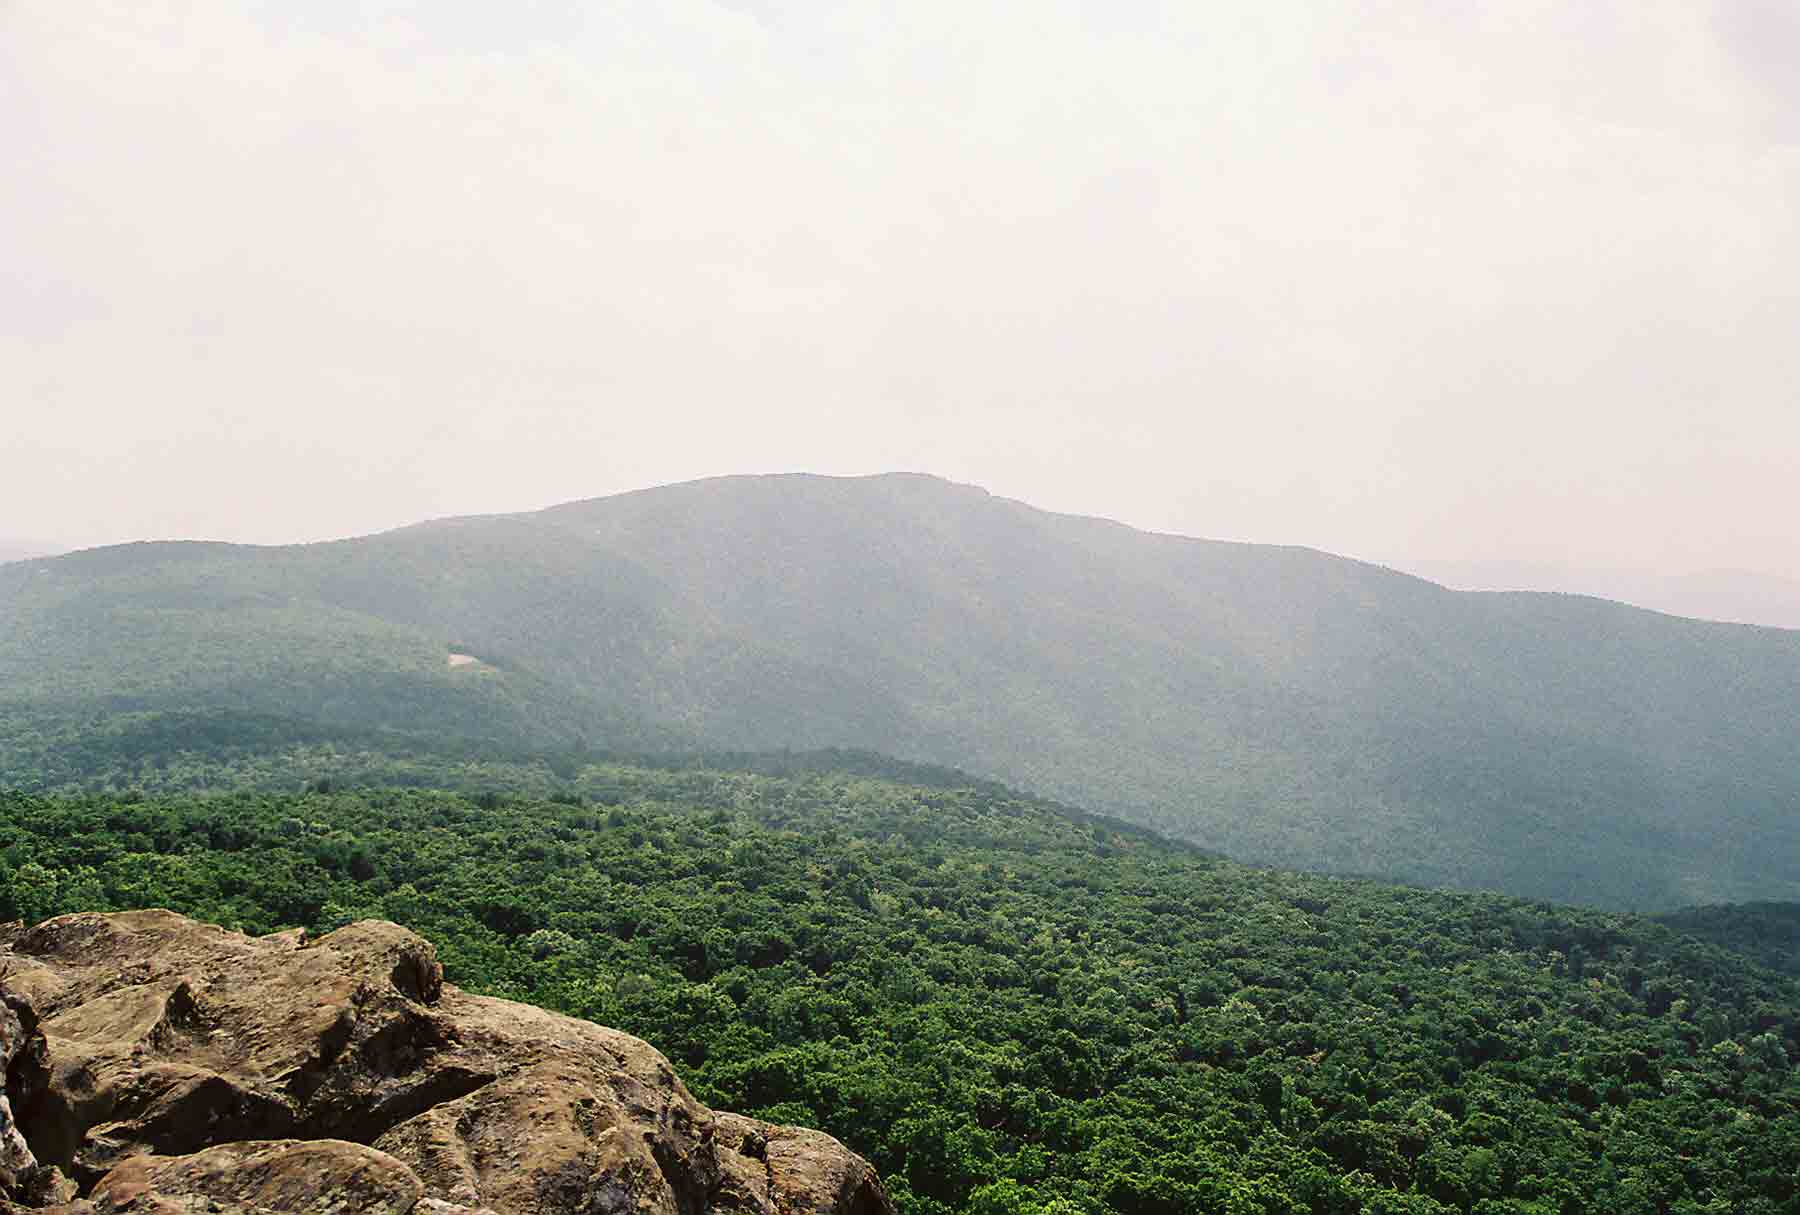 mm 10.9 - View of Hogback Mt. from viewpoint near summit of North Marshall Mt. (May 2004).  Courtesy dlcul@conncoll.edu